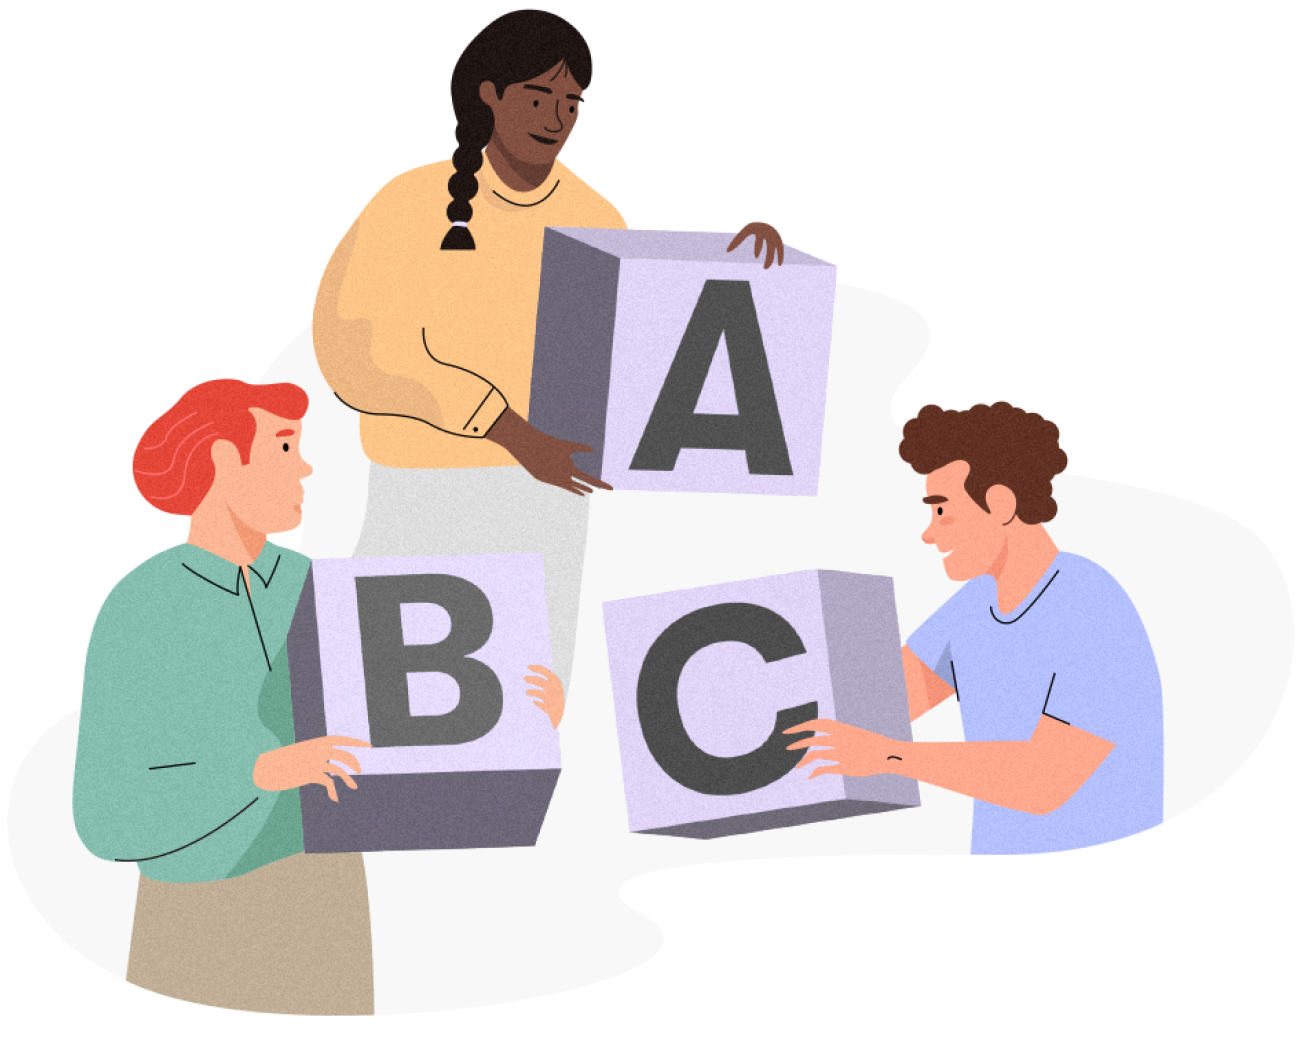 3 people holding A, B and C letters